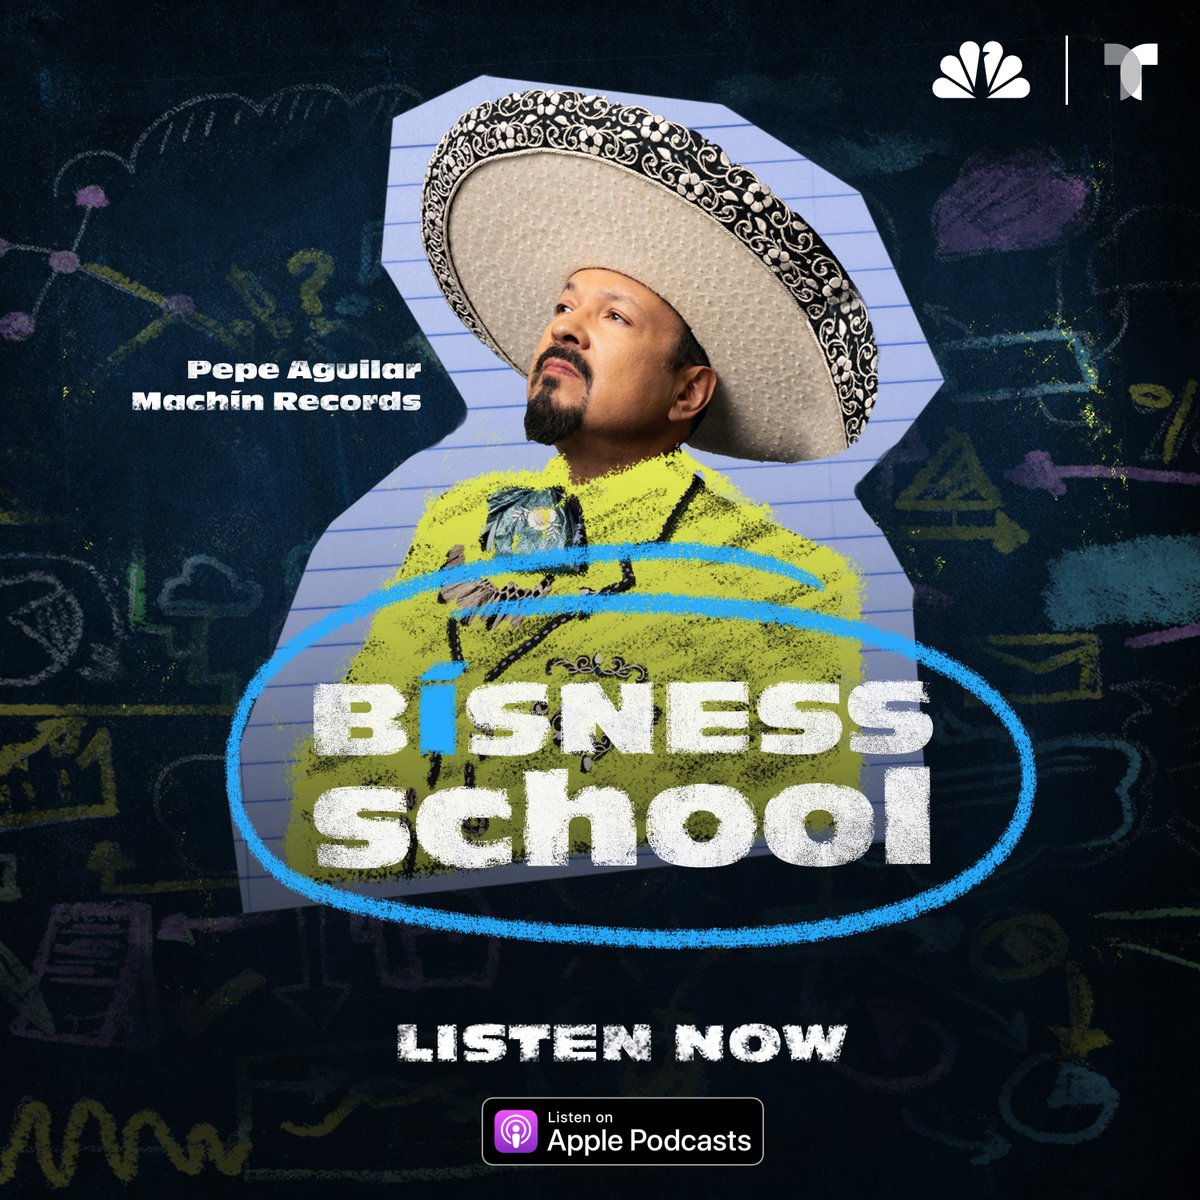 Pepe Aguilar will make a tour stop in Dallas this weekend! On the #BísnessSchool podcast, he shares his lessons in business and family and what he learned from breaking away from big music labels.
🎧 Listen to the full episode on @ApplePodcasts: on.nbcdfw.com/tGG2Rpq